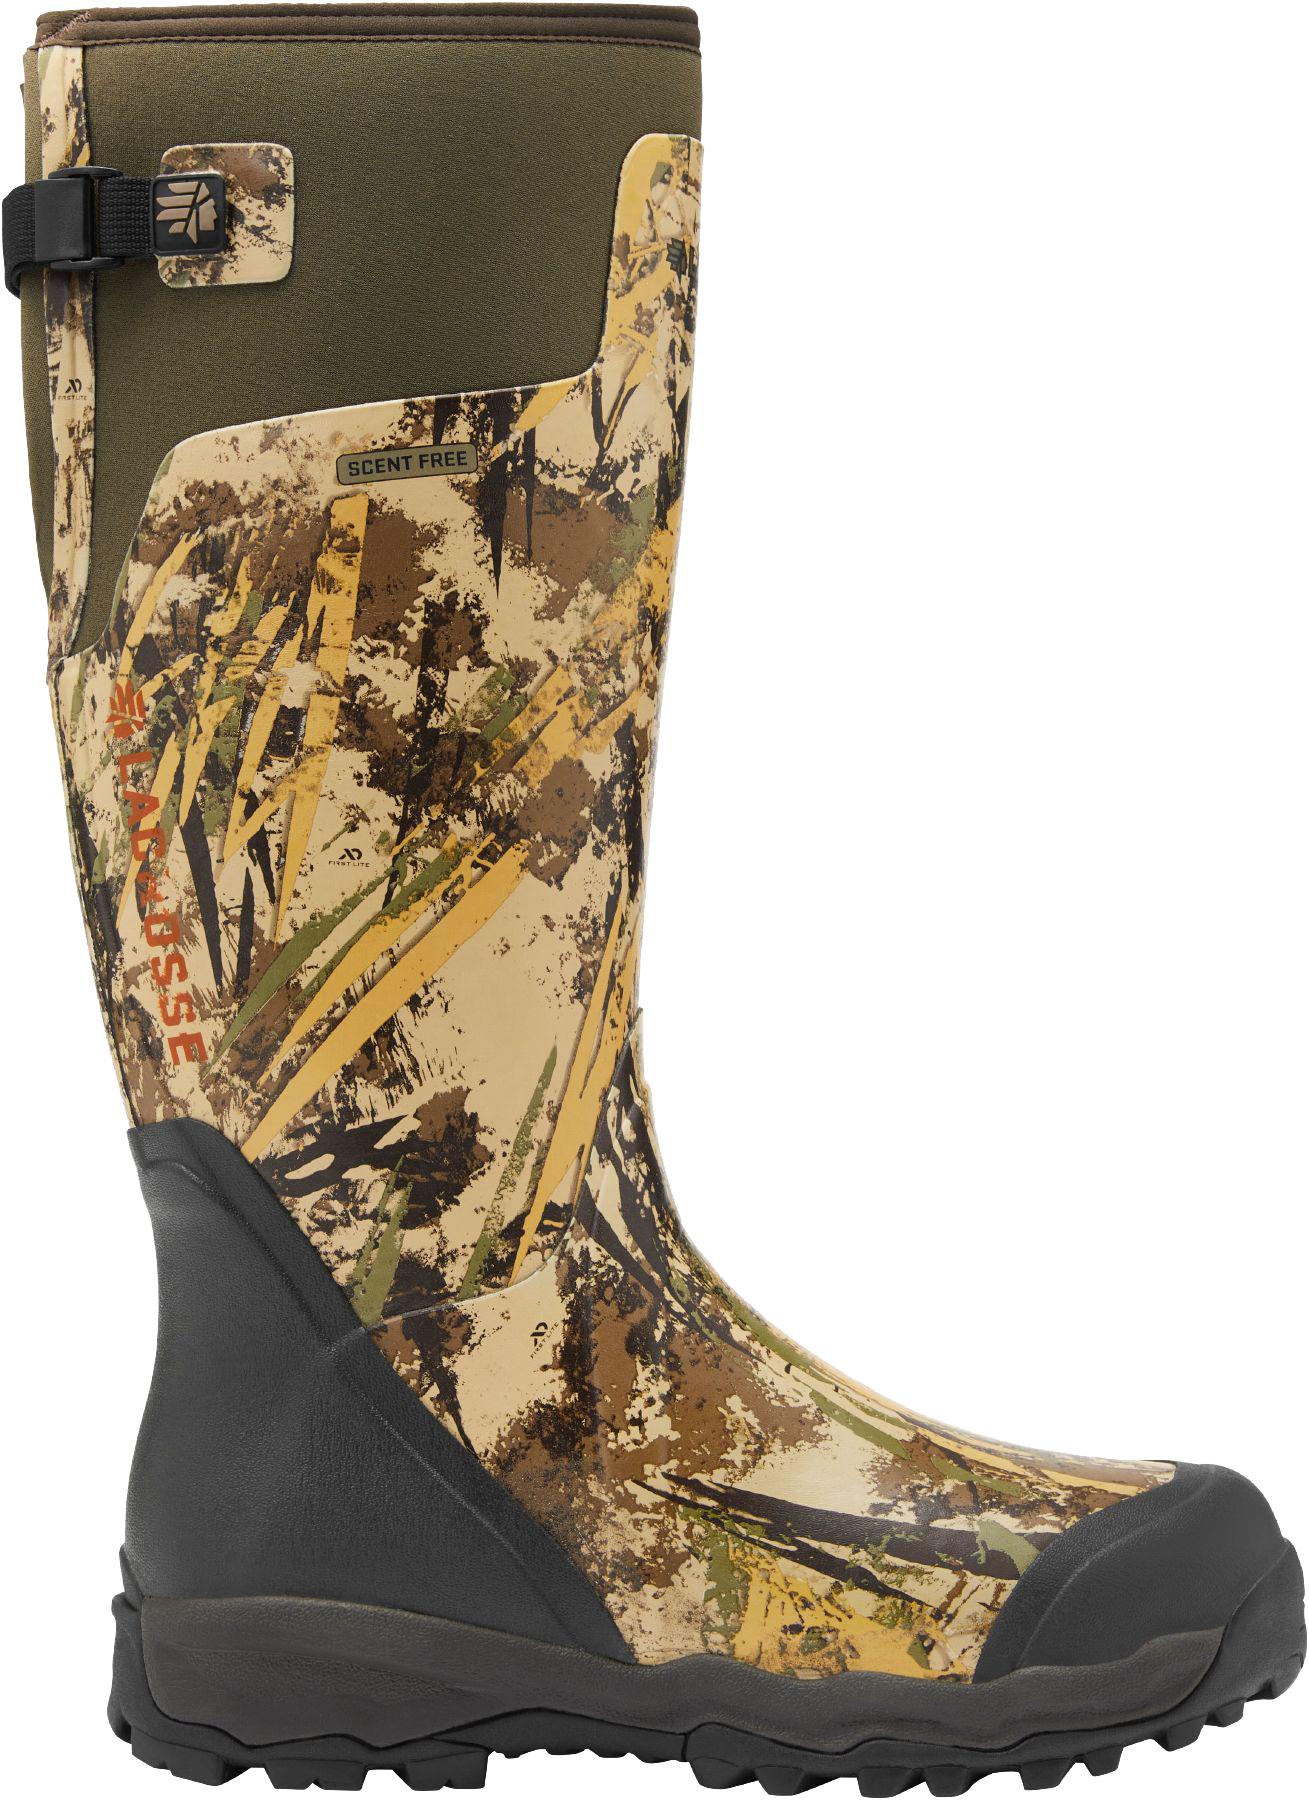 LaCrosse AlphaBurly Pro Hunting Boots for Men - First Lite Typha - 7M